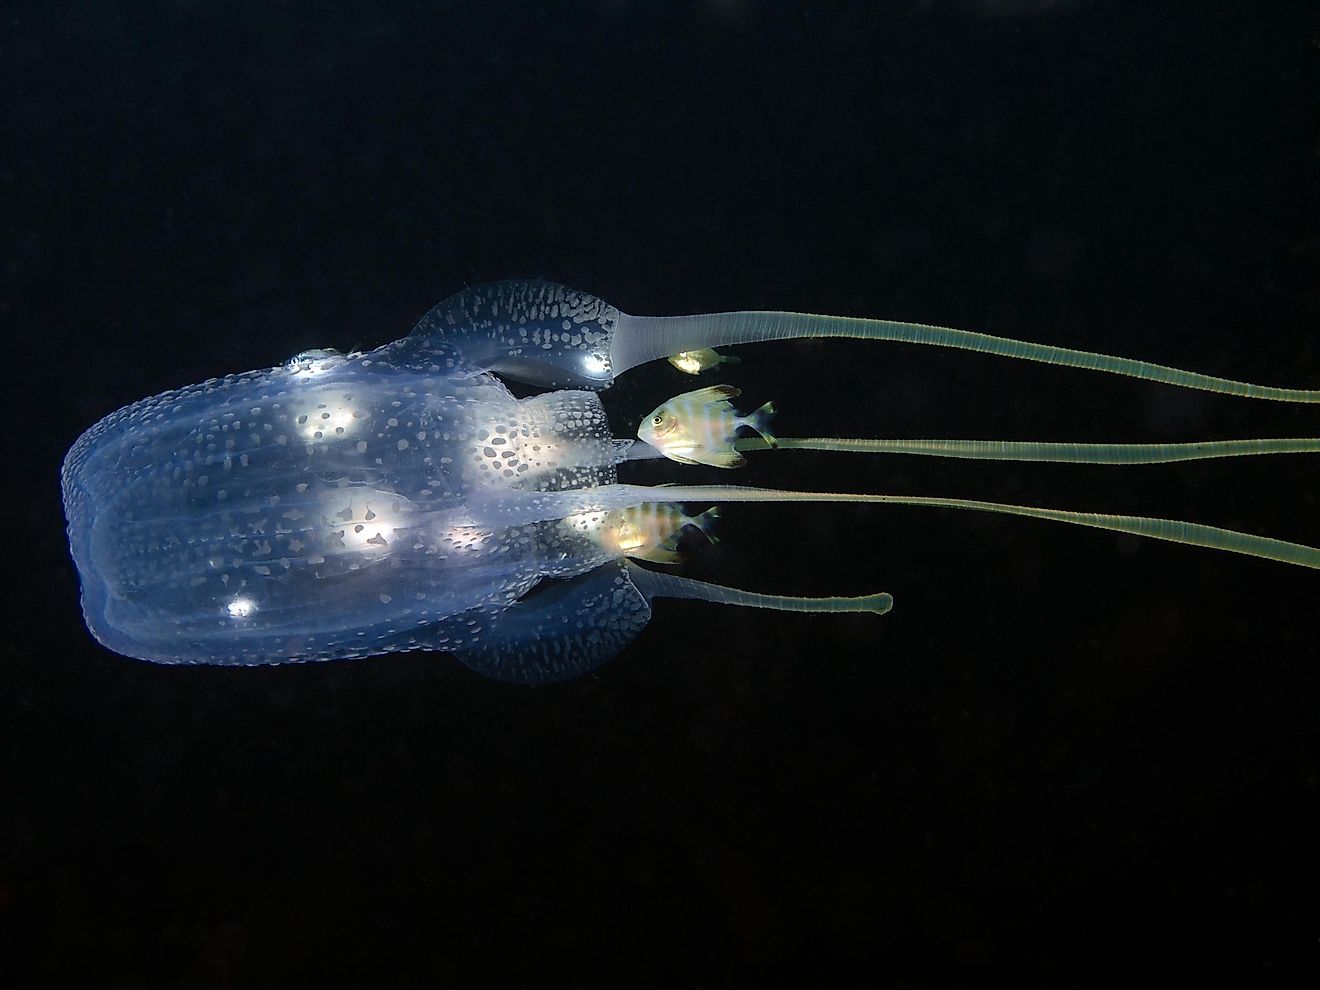 A box jellyfish in the ocean.